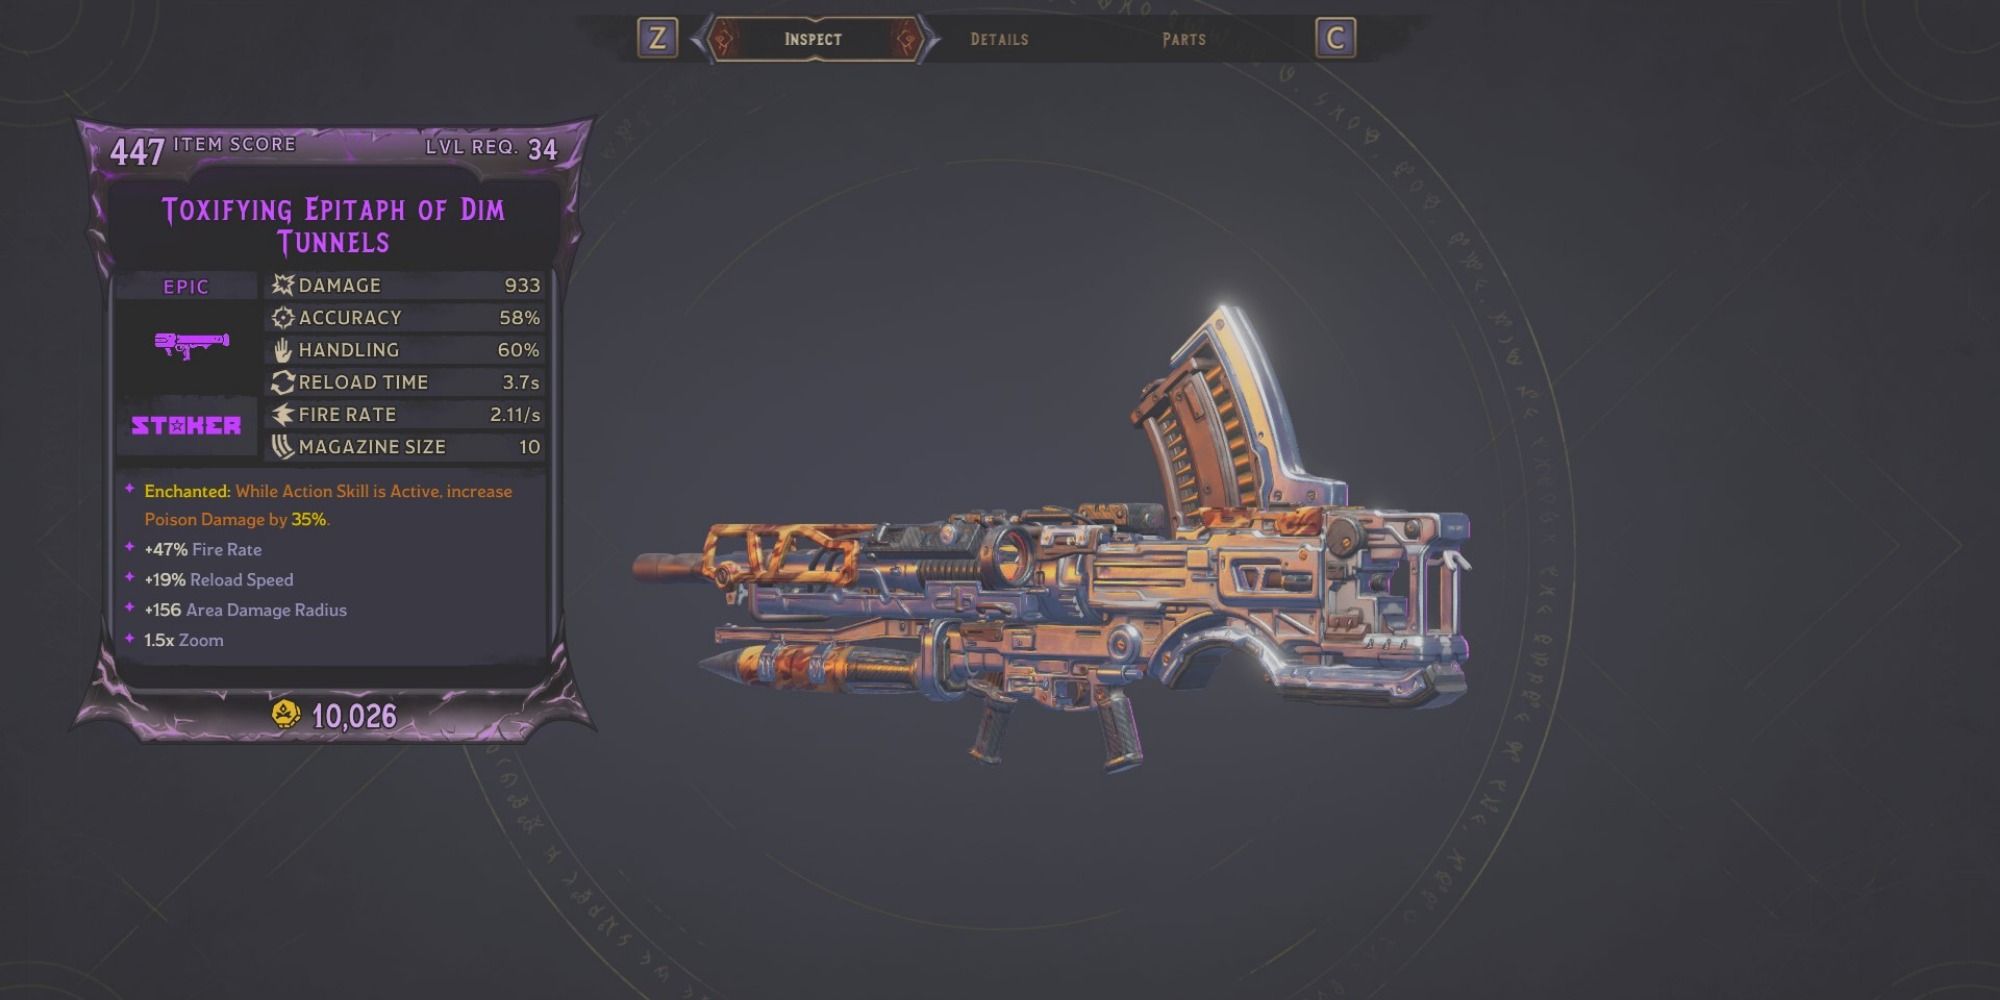 Epitaph heavy weapon on purple background of inspect menu